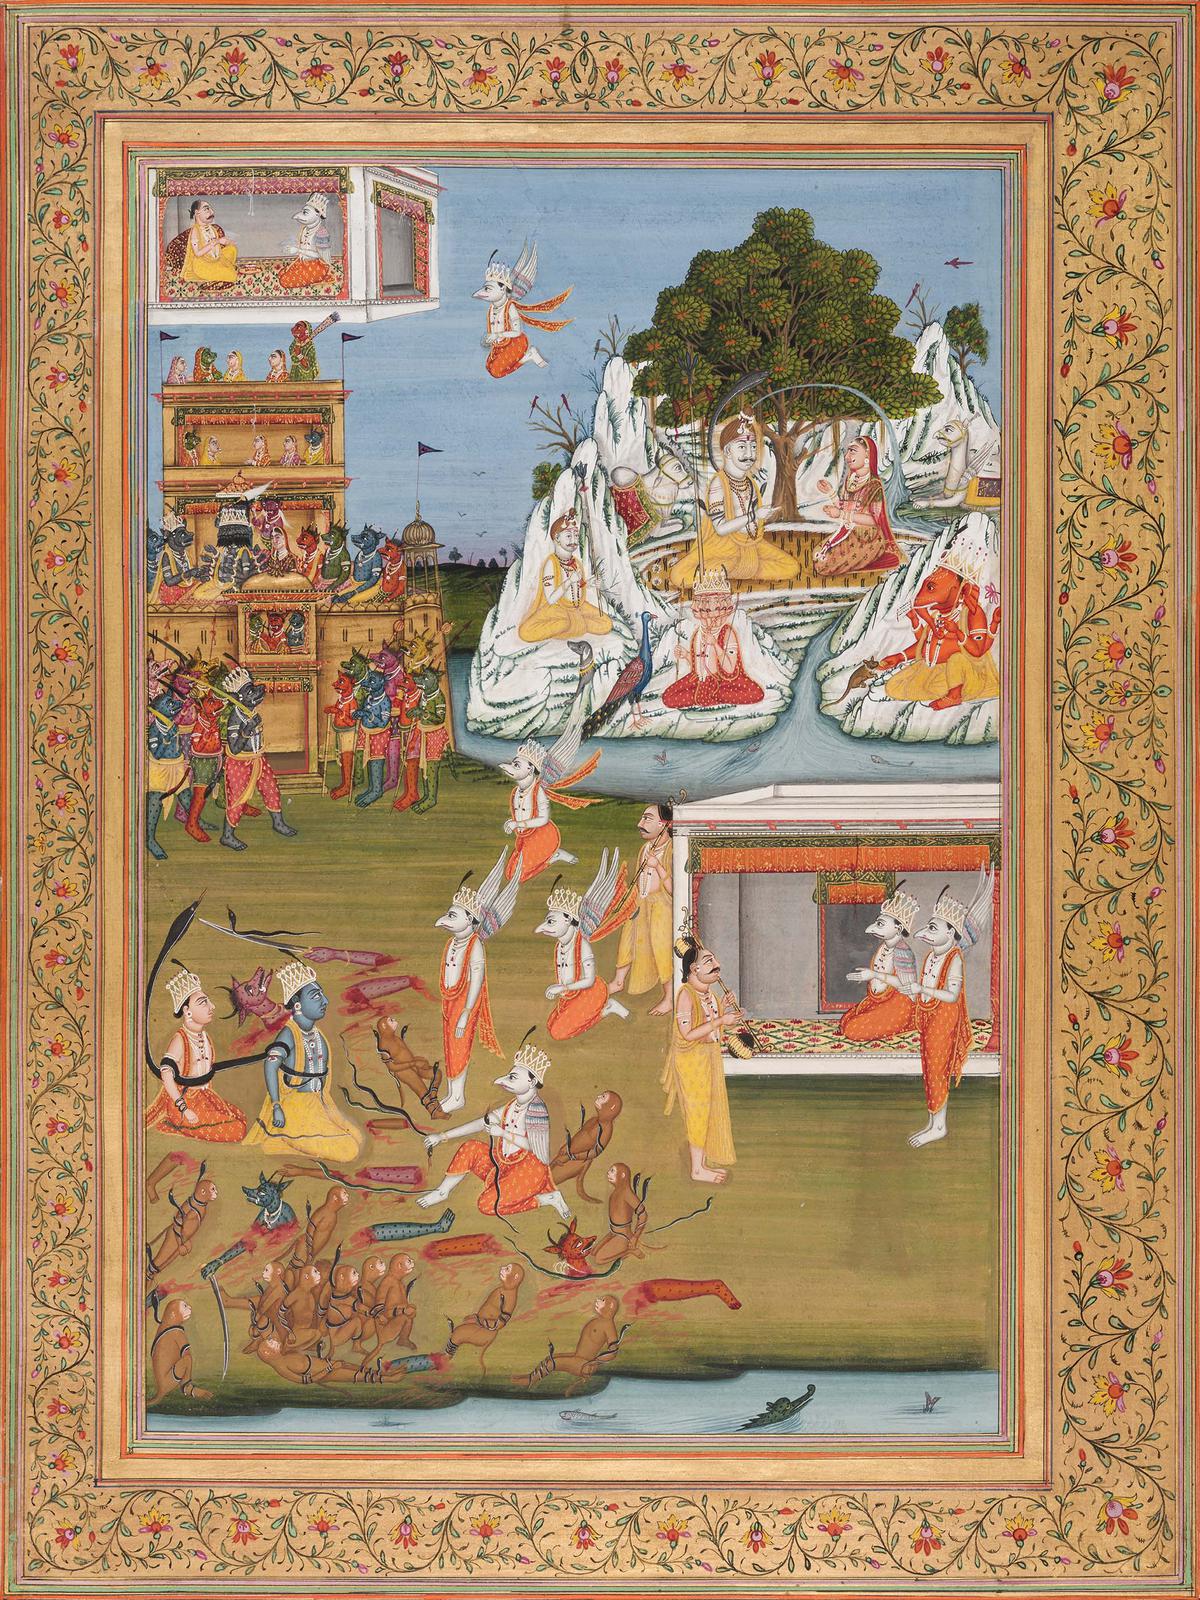 Garuda Has Doubts about Rama’s Divinity
1814 Style D, Artists from the second wave of migrations from Jaipur, perhaps assisted by local painters